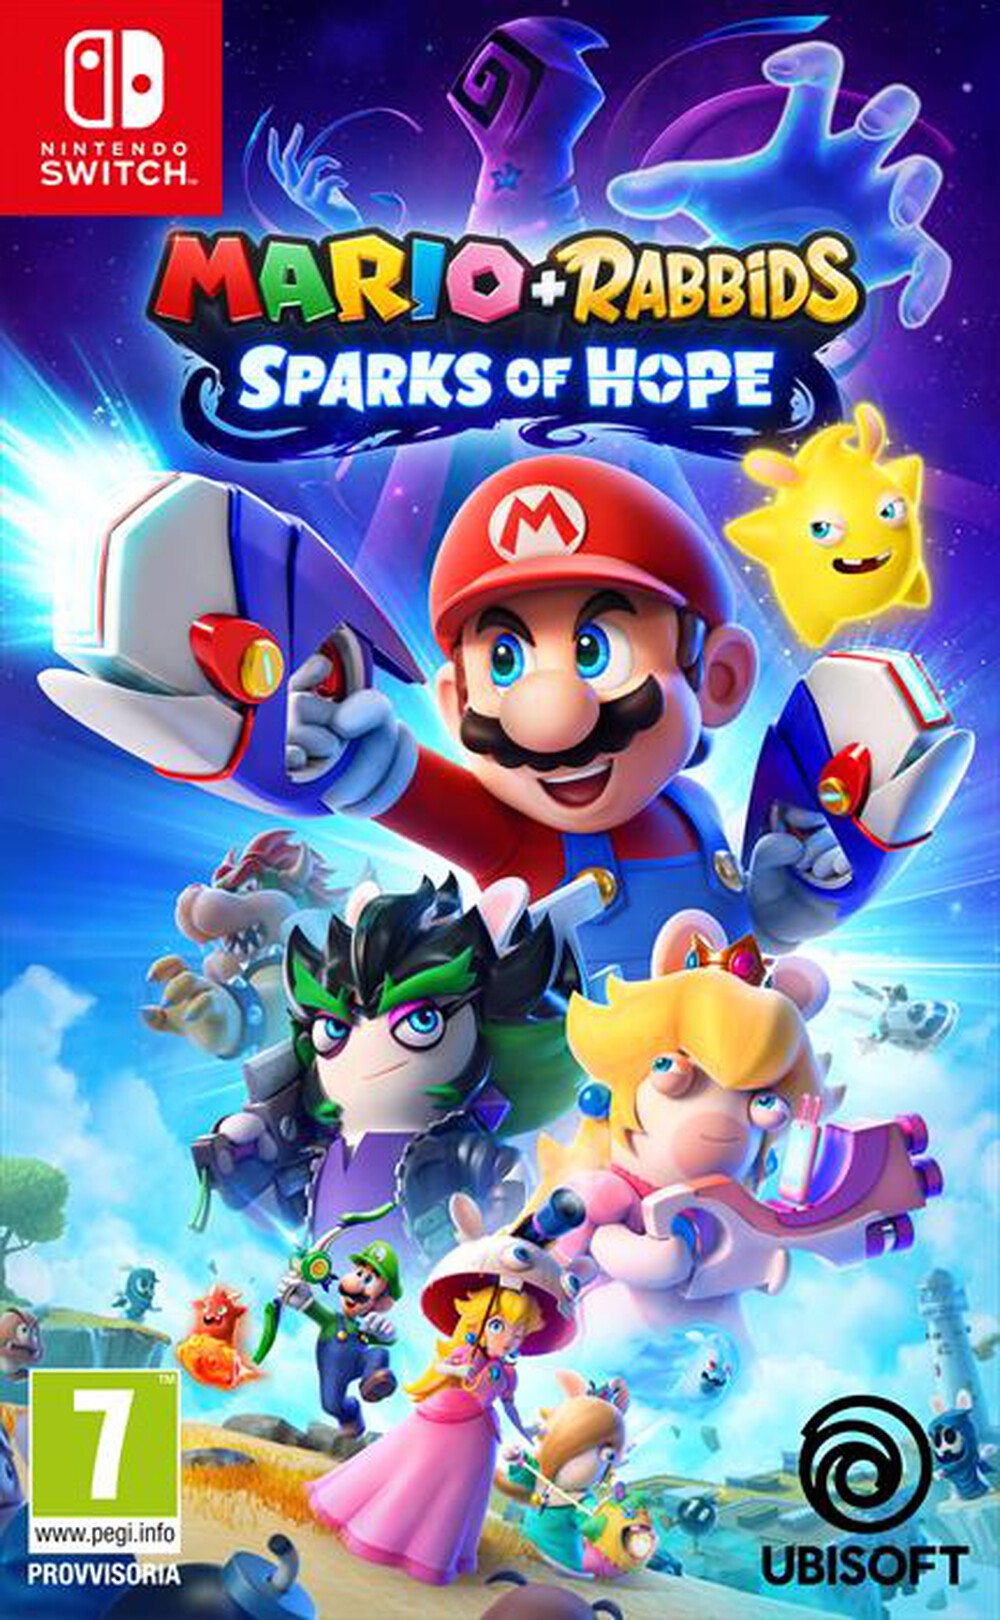 "UBISOFT - MARIO + RABBIDS SPARKS OF HOPE SWITCH"